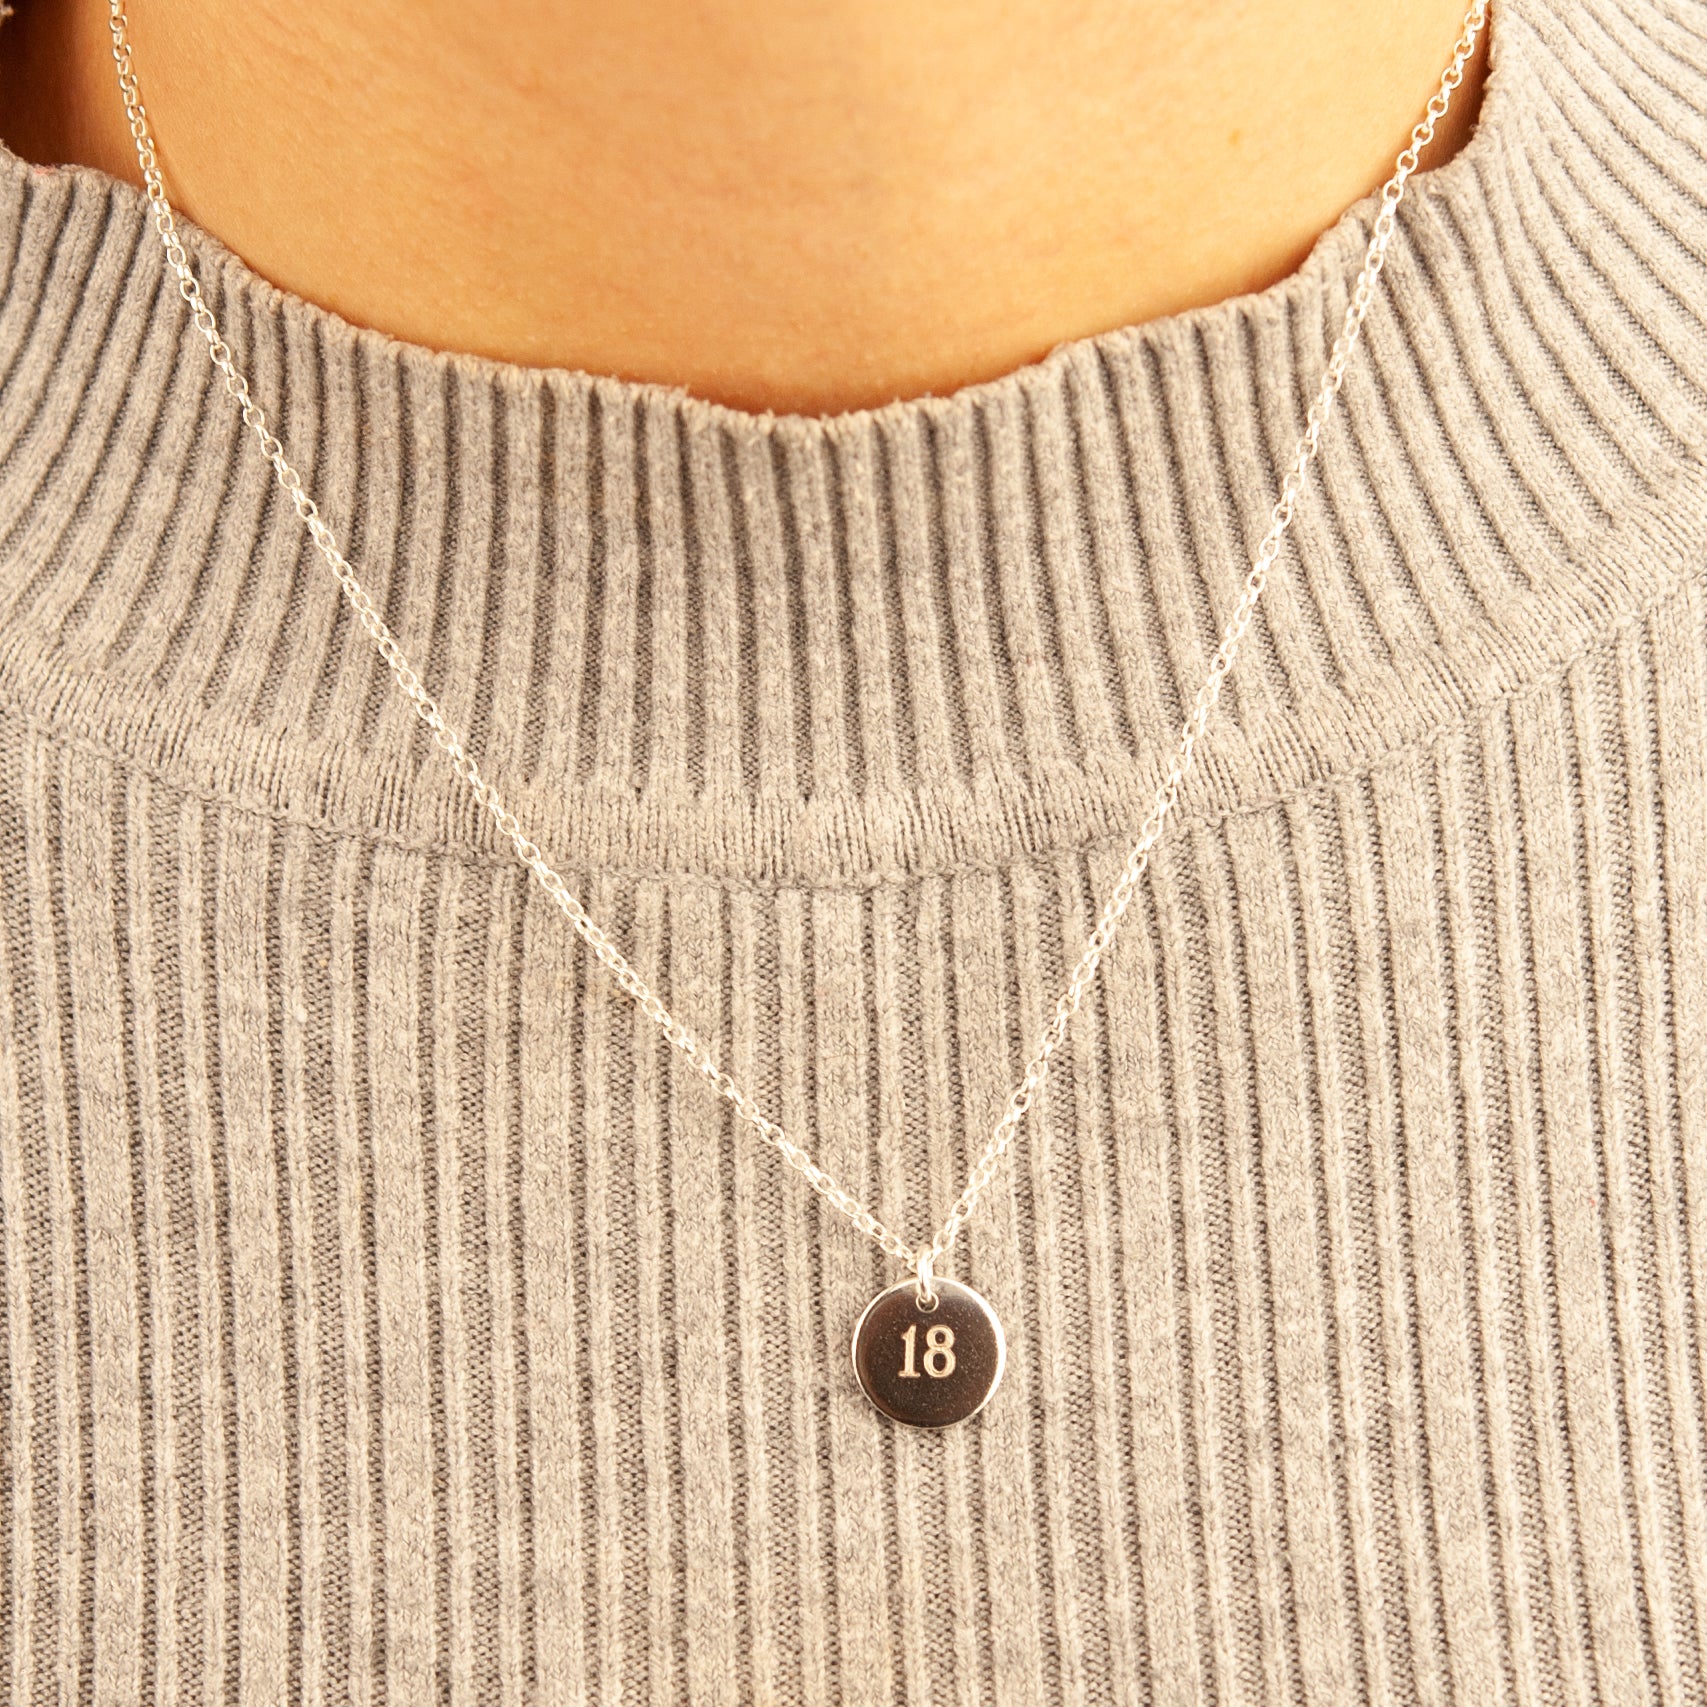 Belle & Bee Sterling silver birthday disc necklace